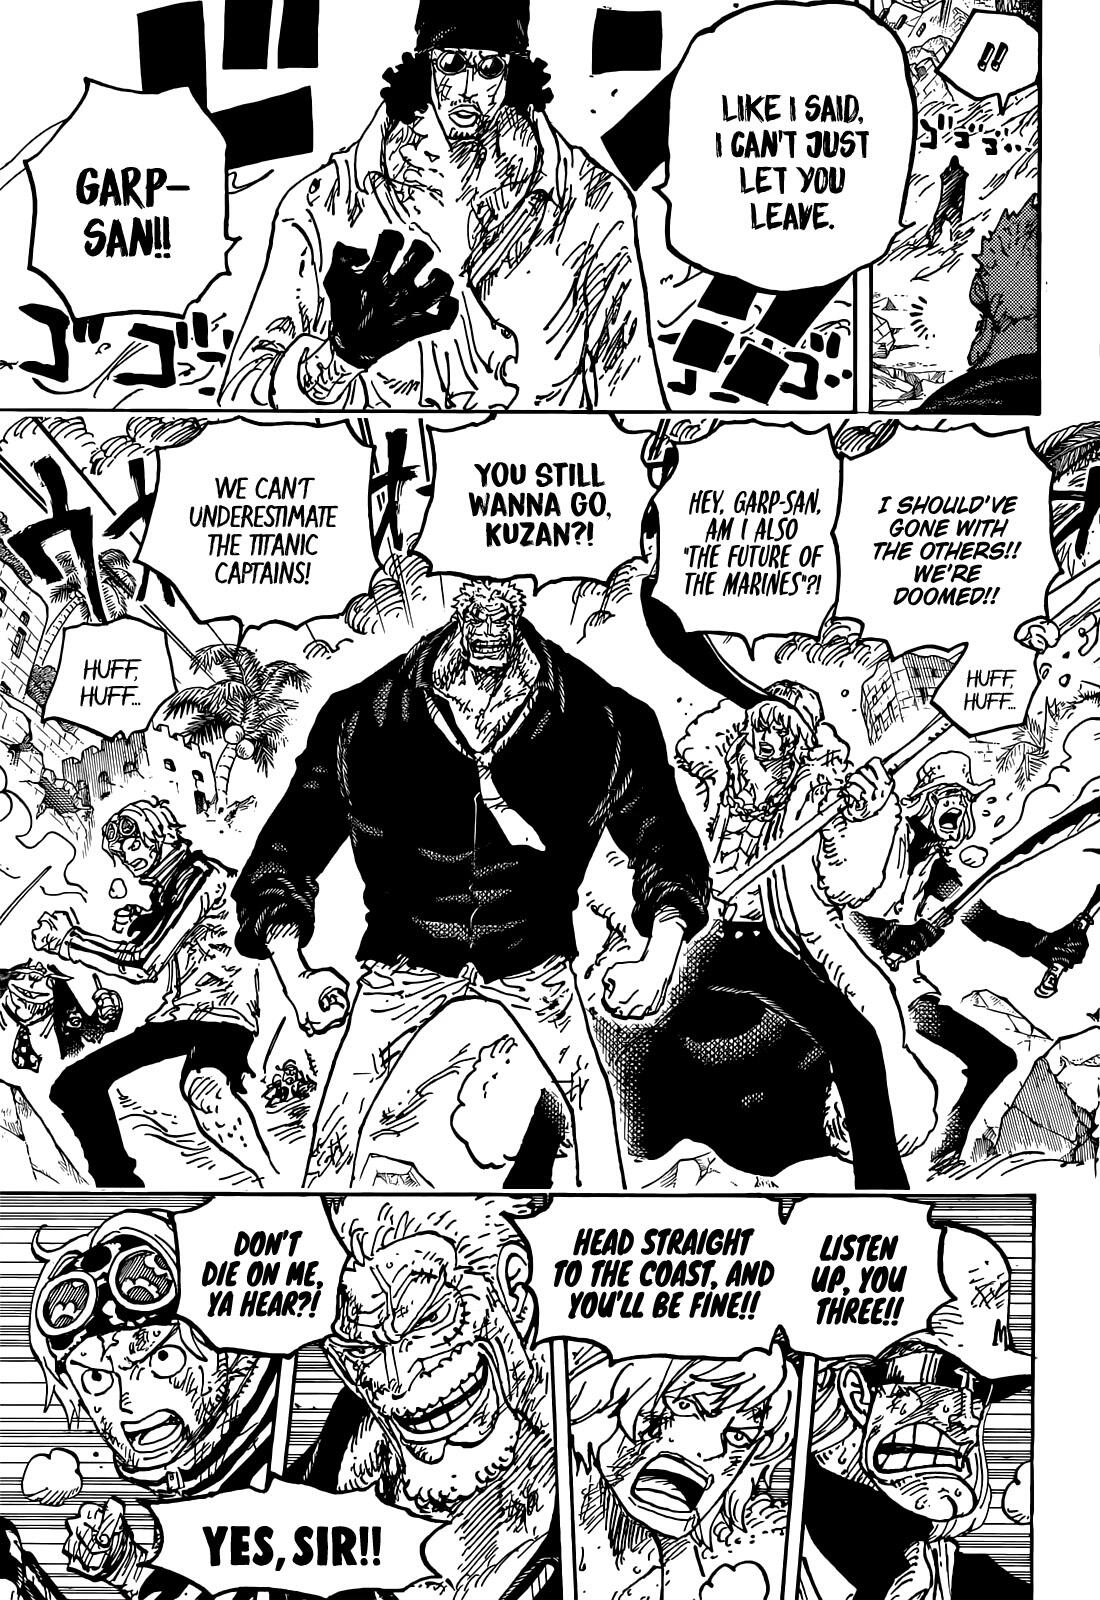 One Piece Chapter 1087; “Battleship Bags”, Page 25